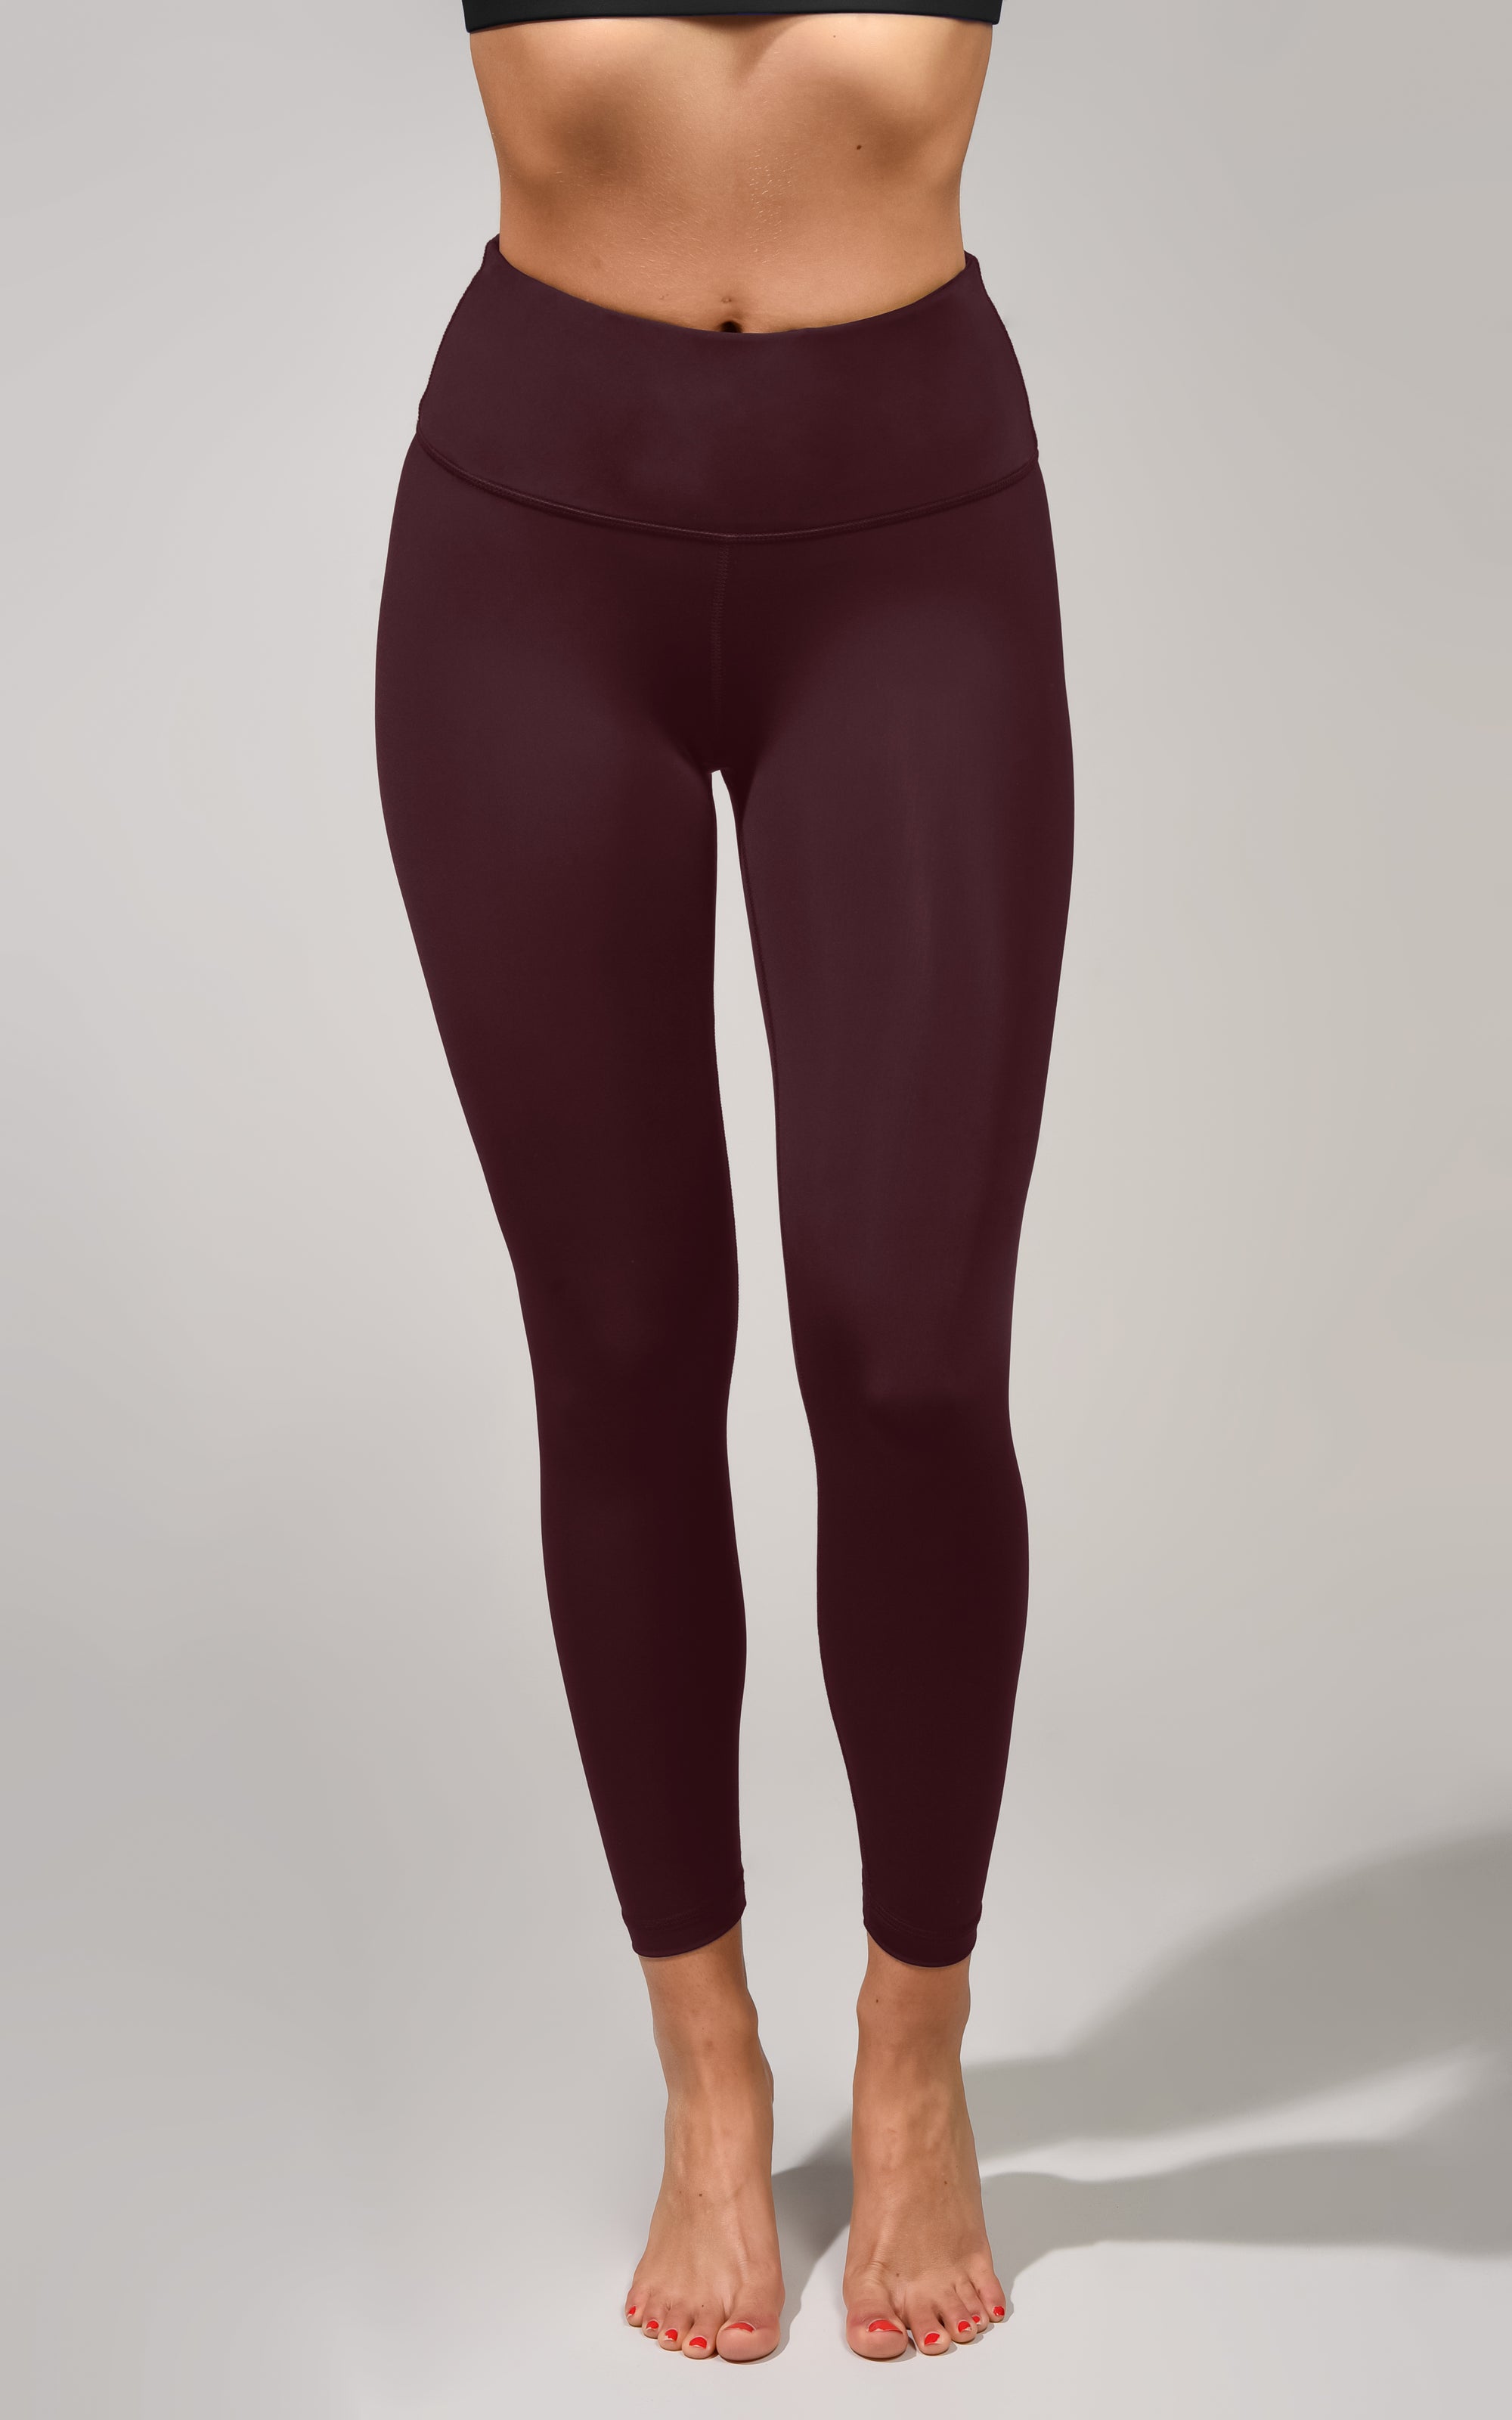 90 Degree By Reflex, Pants & Jumpsuits, 9 Degrees By Reflex Xs Leggings  78 Length